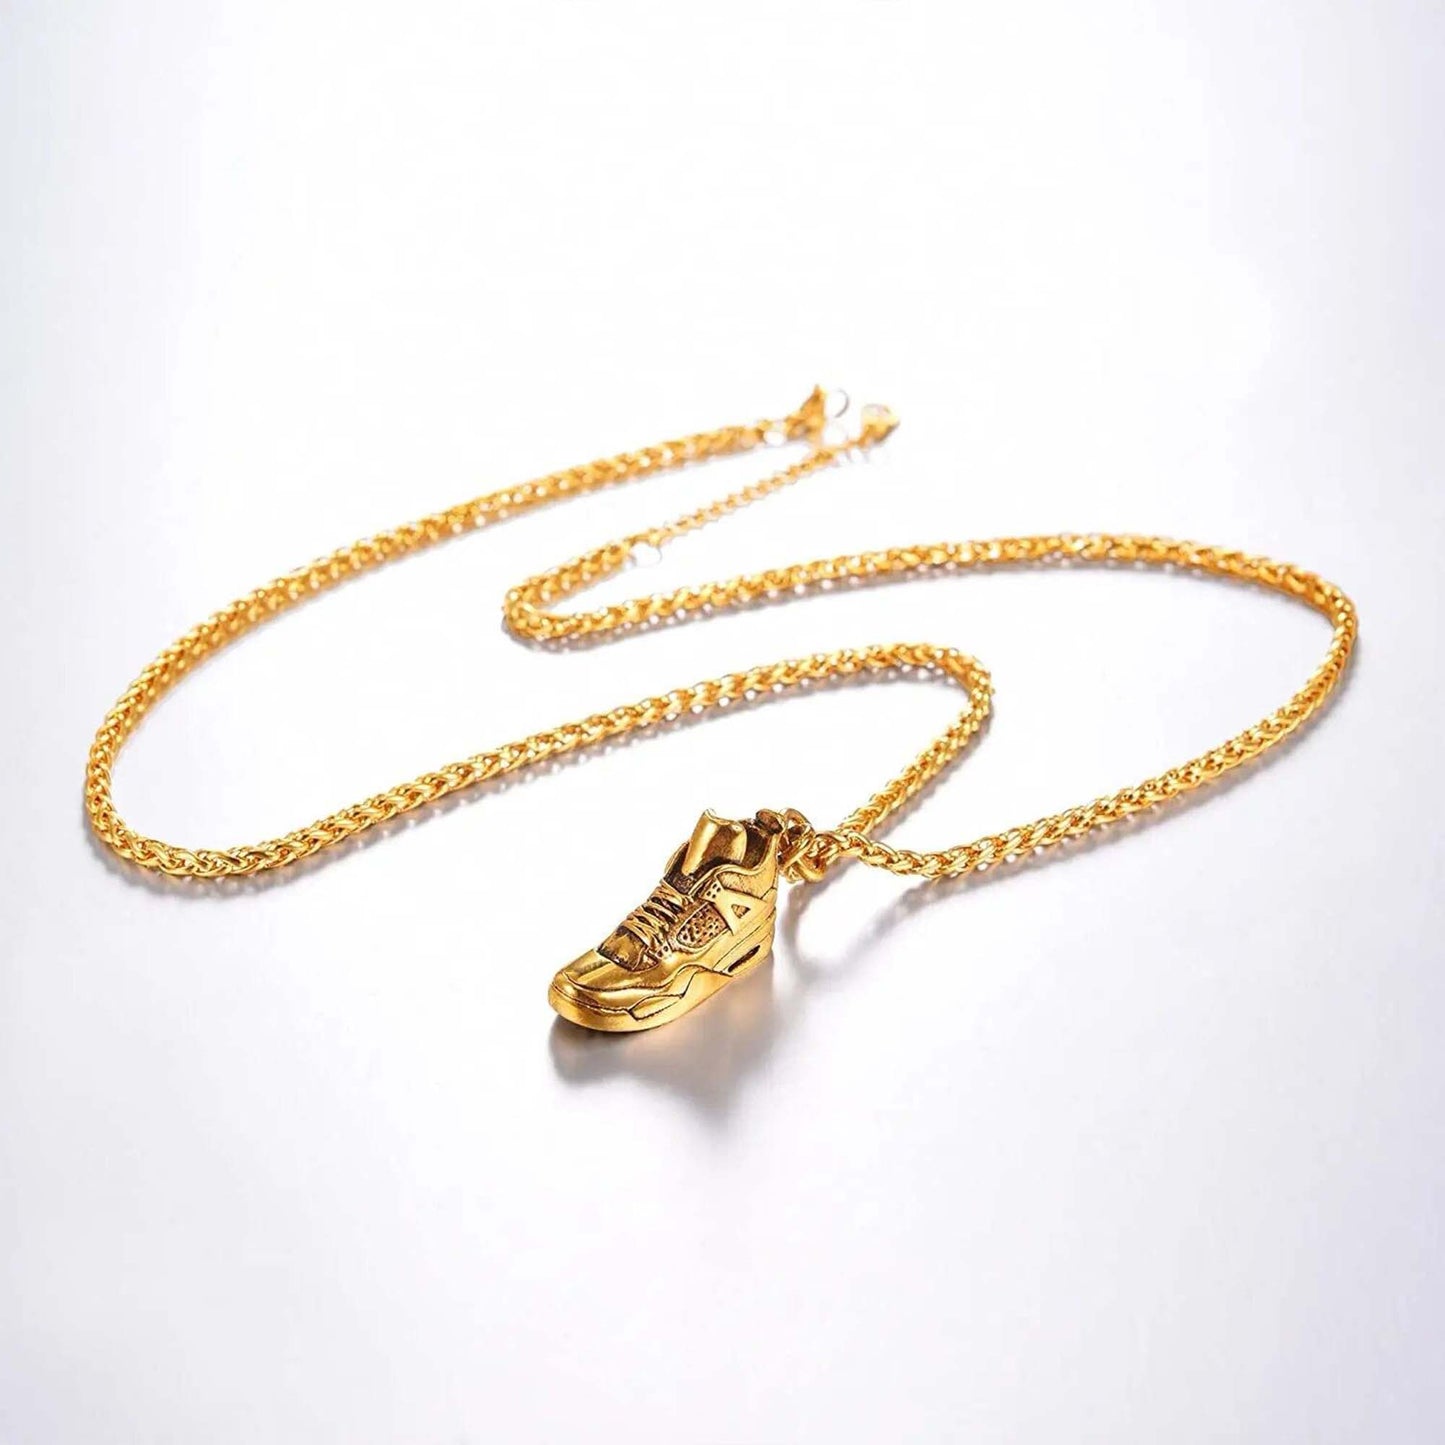 18k Gold Shoe Pendant with Chain